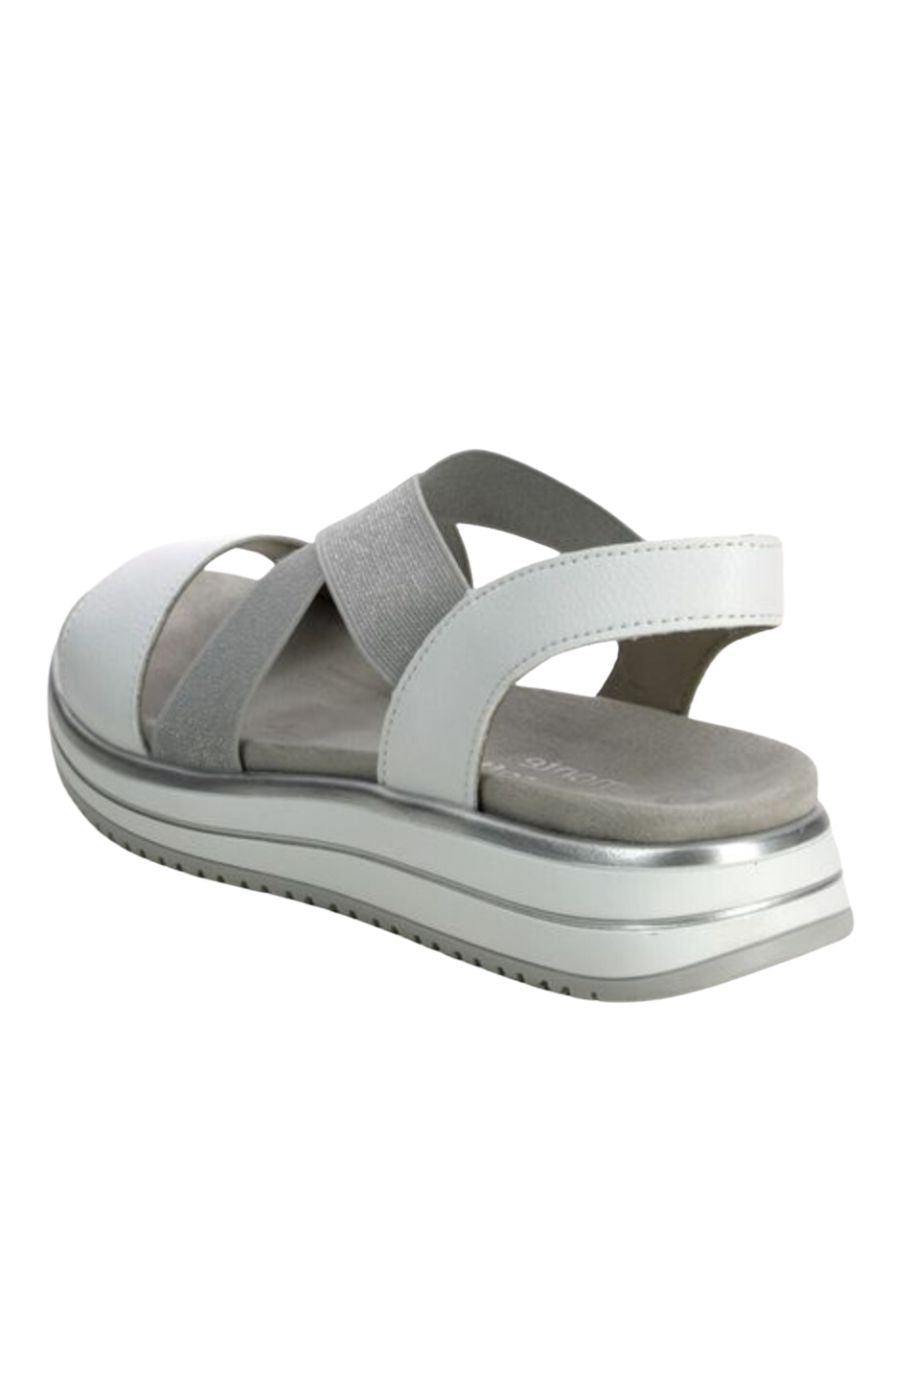 Remonte Wedge Sandal in Silver